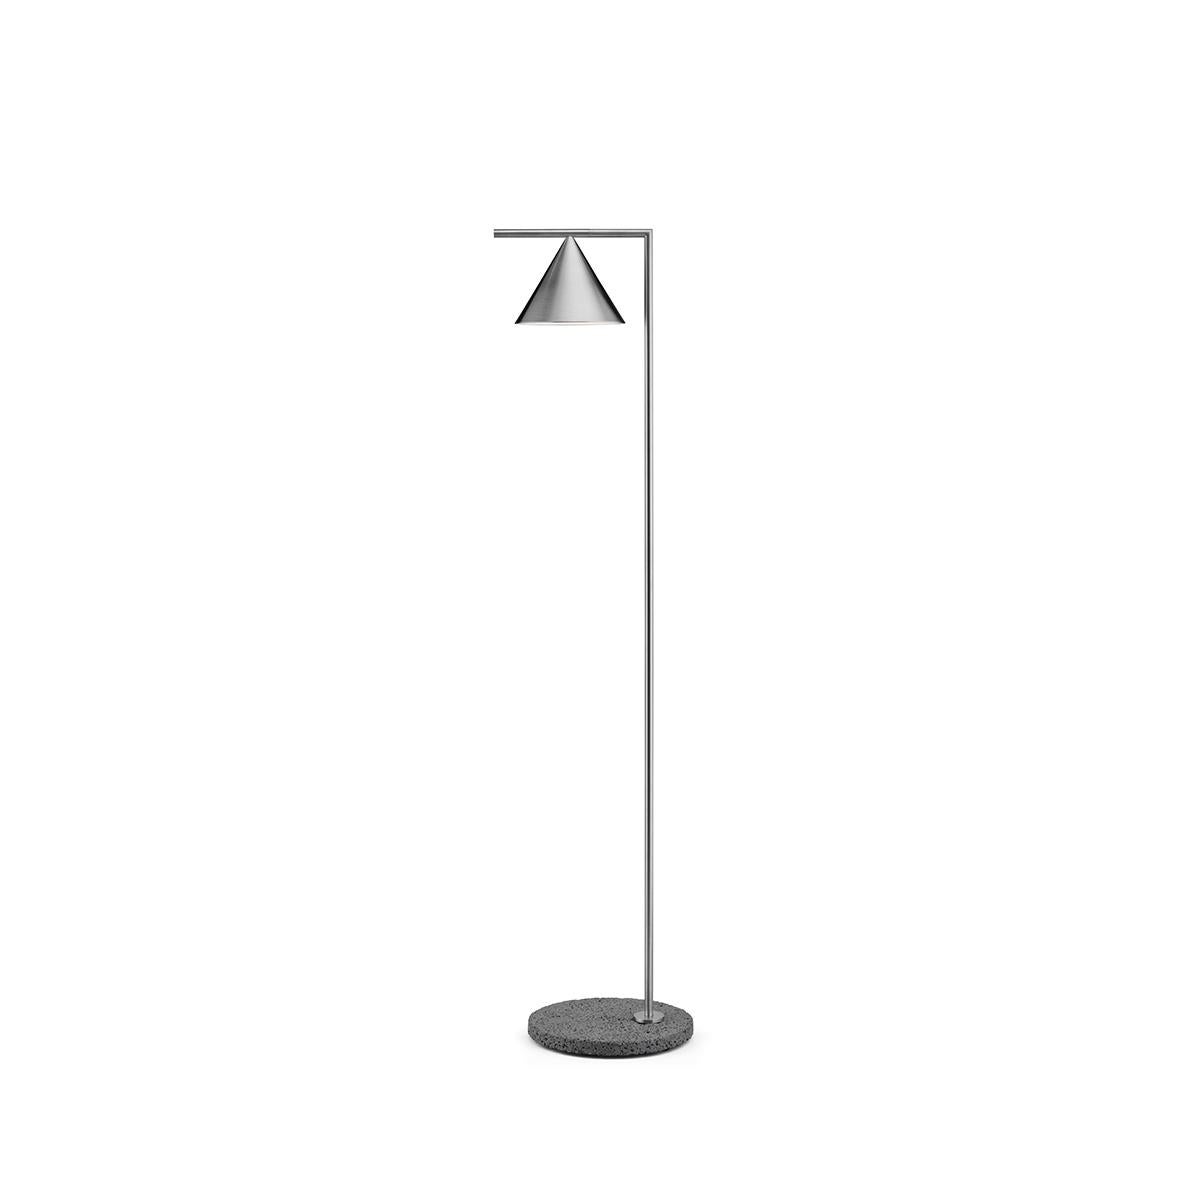 For Sale: Gray (Stainless Steel / Occhio di Pernice Base) Flos Captain Flint 2700K Outdoor Floor Lamp by Michael Anastassiades